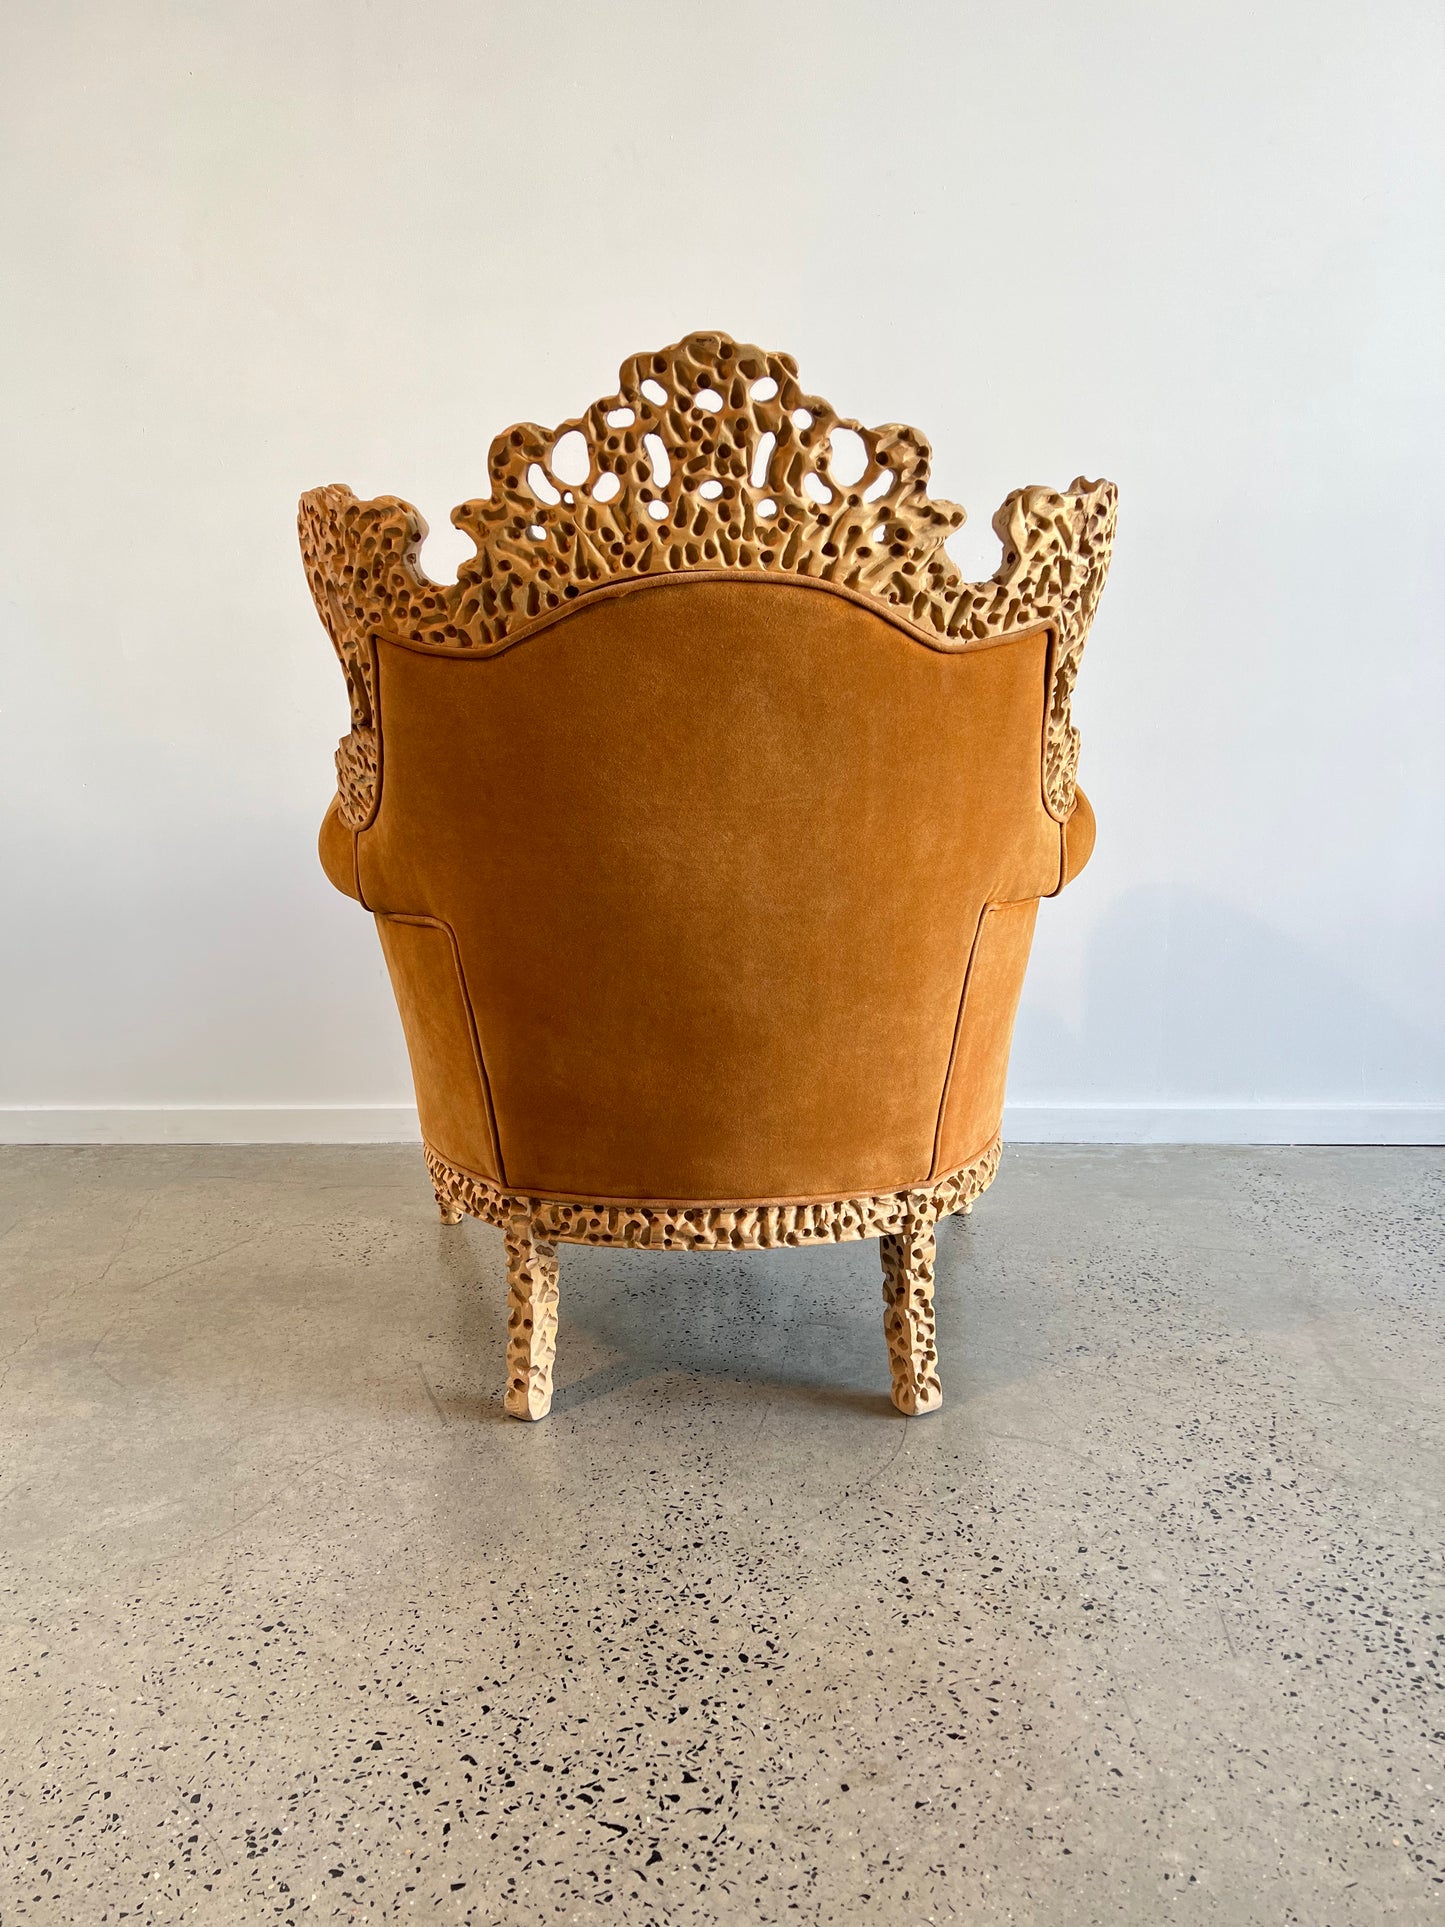 “Regina” by Urano Palma for Mirabili, Armchair in Orange Suede and Raw Wood, 1990s